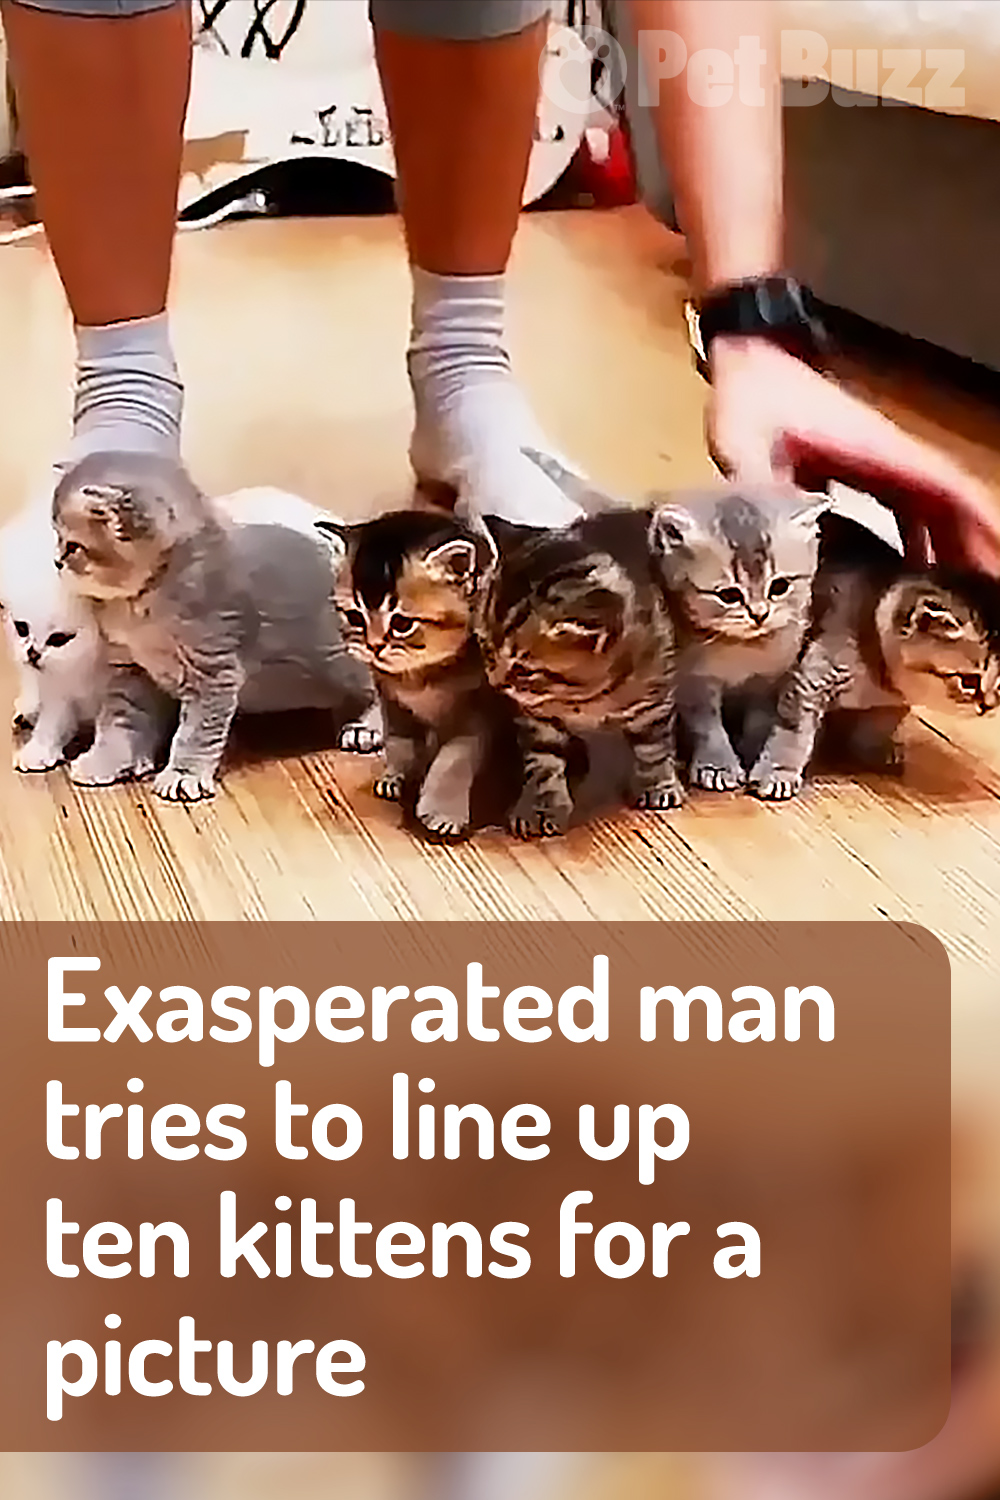 Exasperated man tries to line up ten kittens for a picture